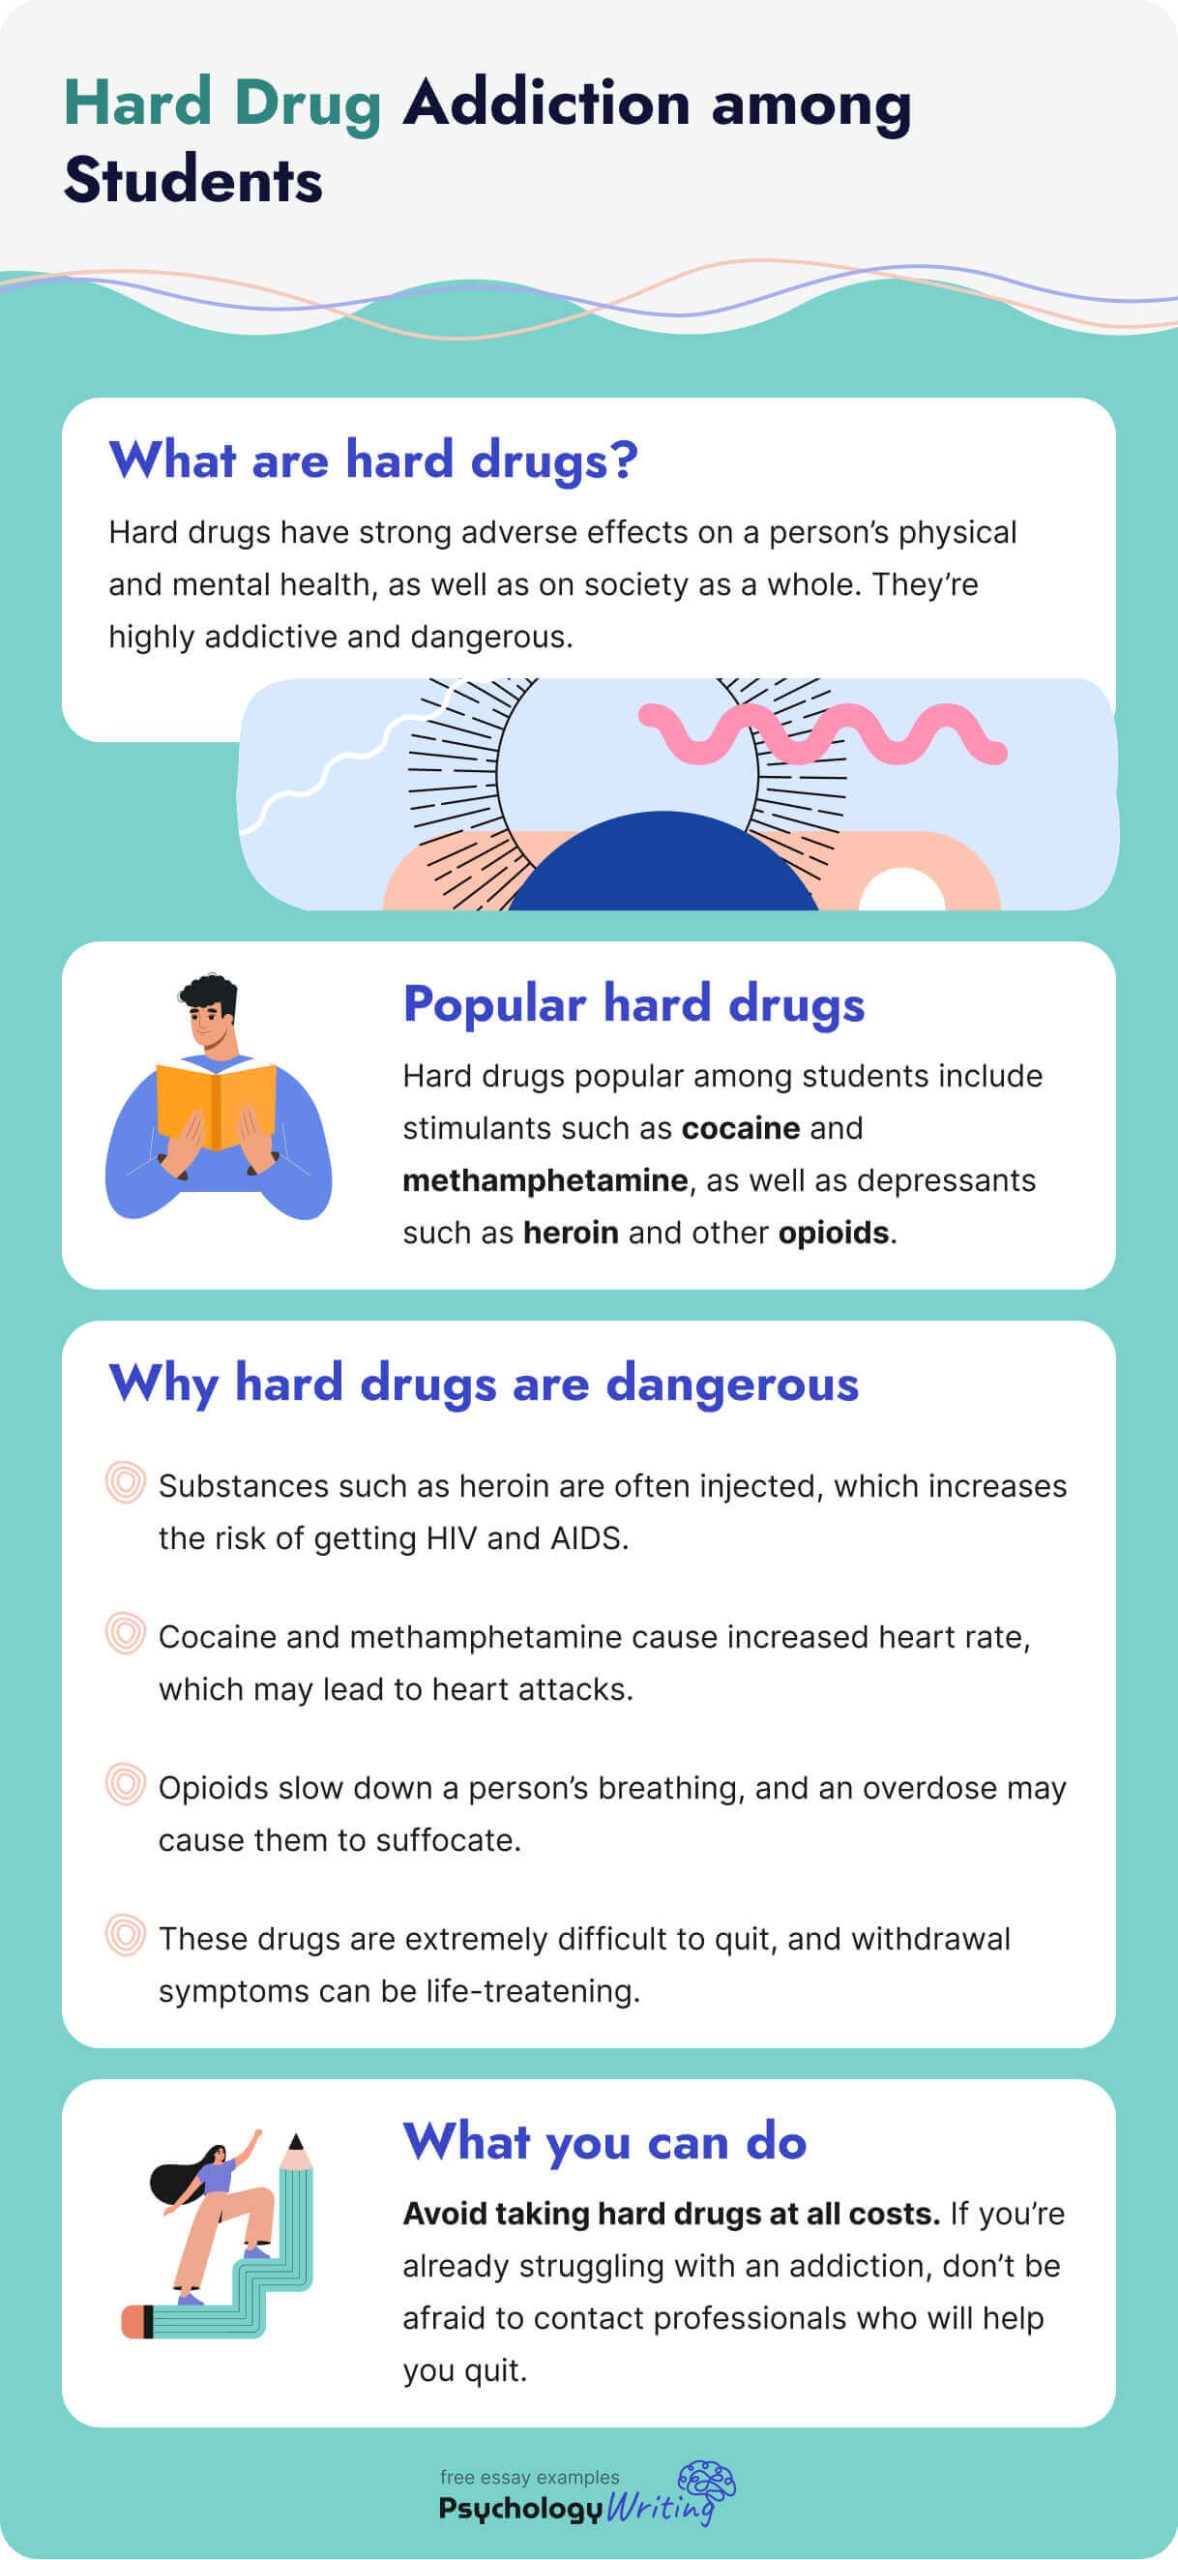 The picture contains information about hard drug addiction among students.